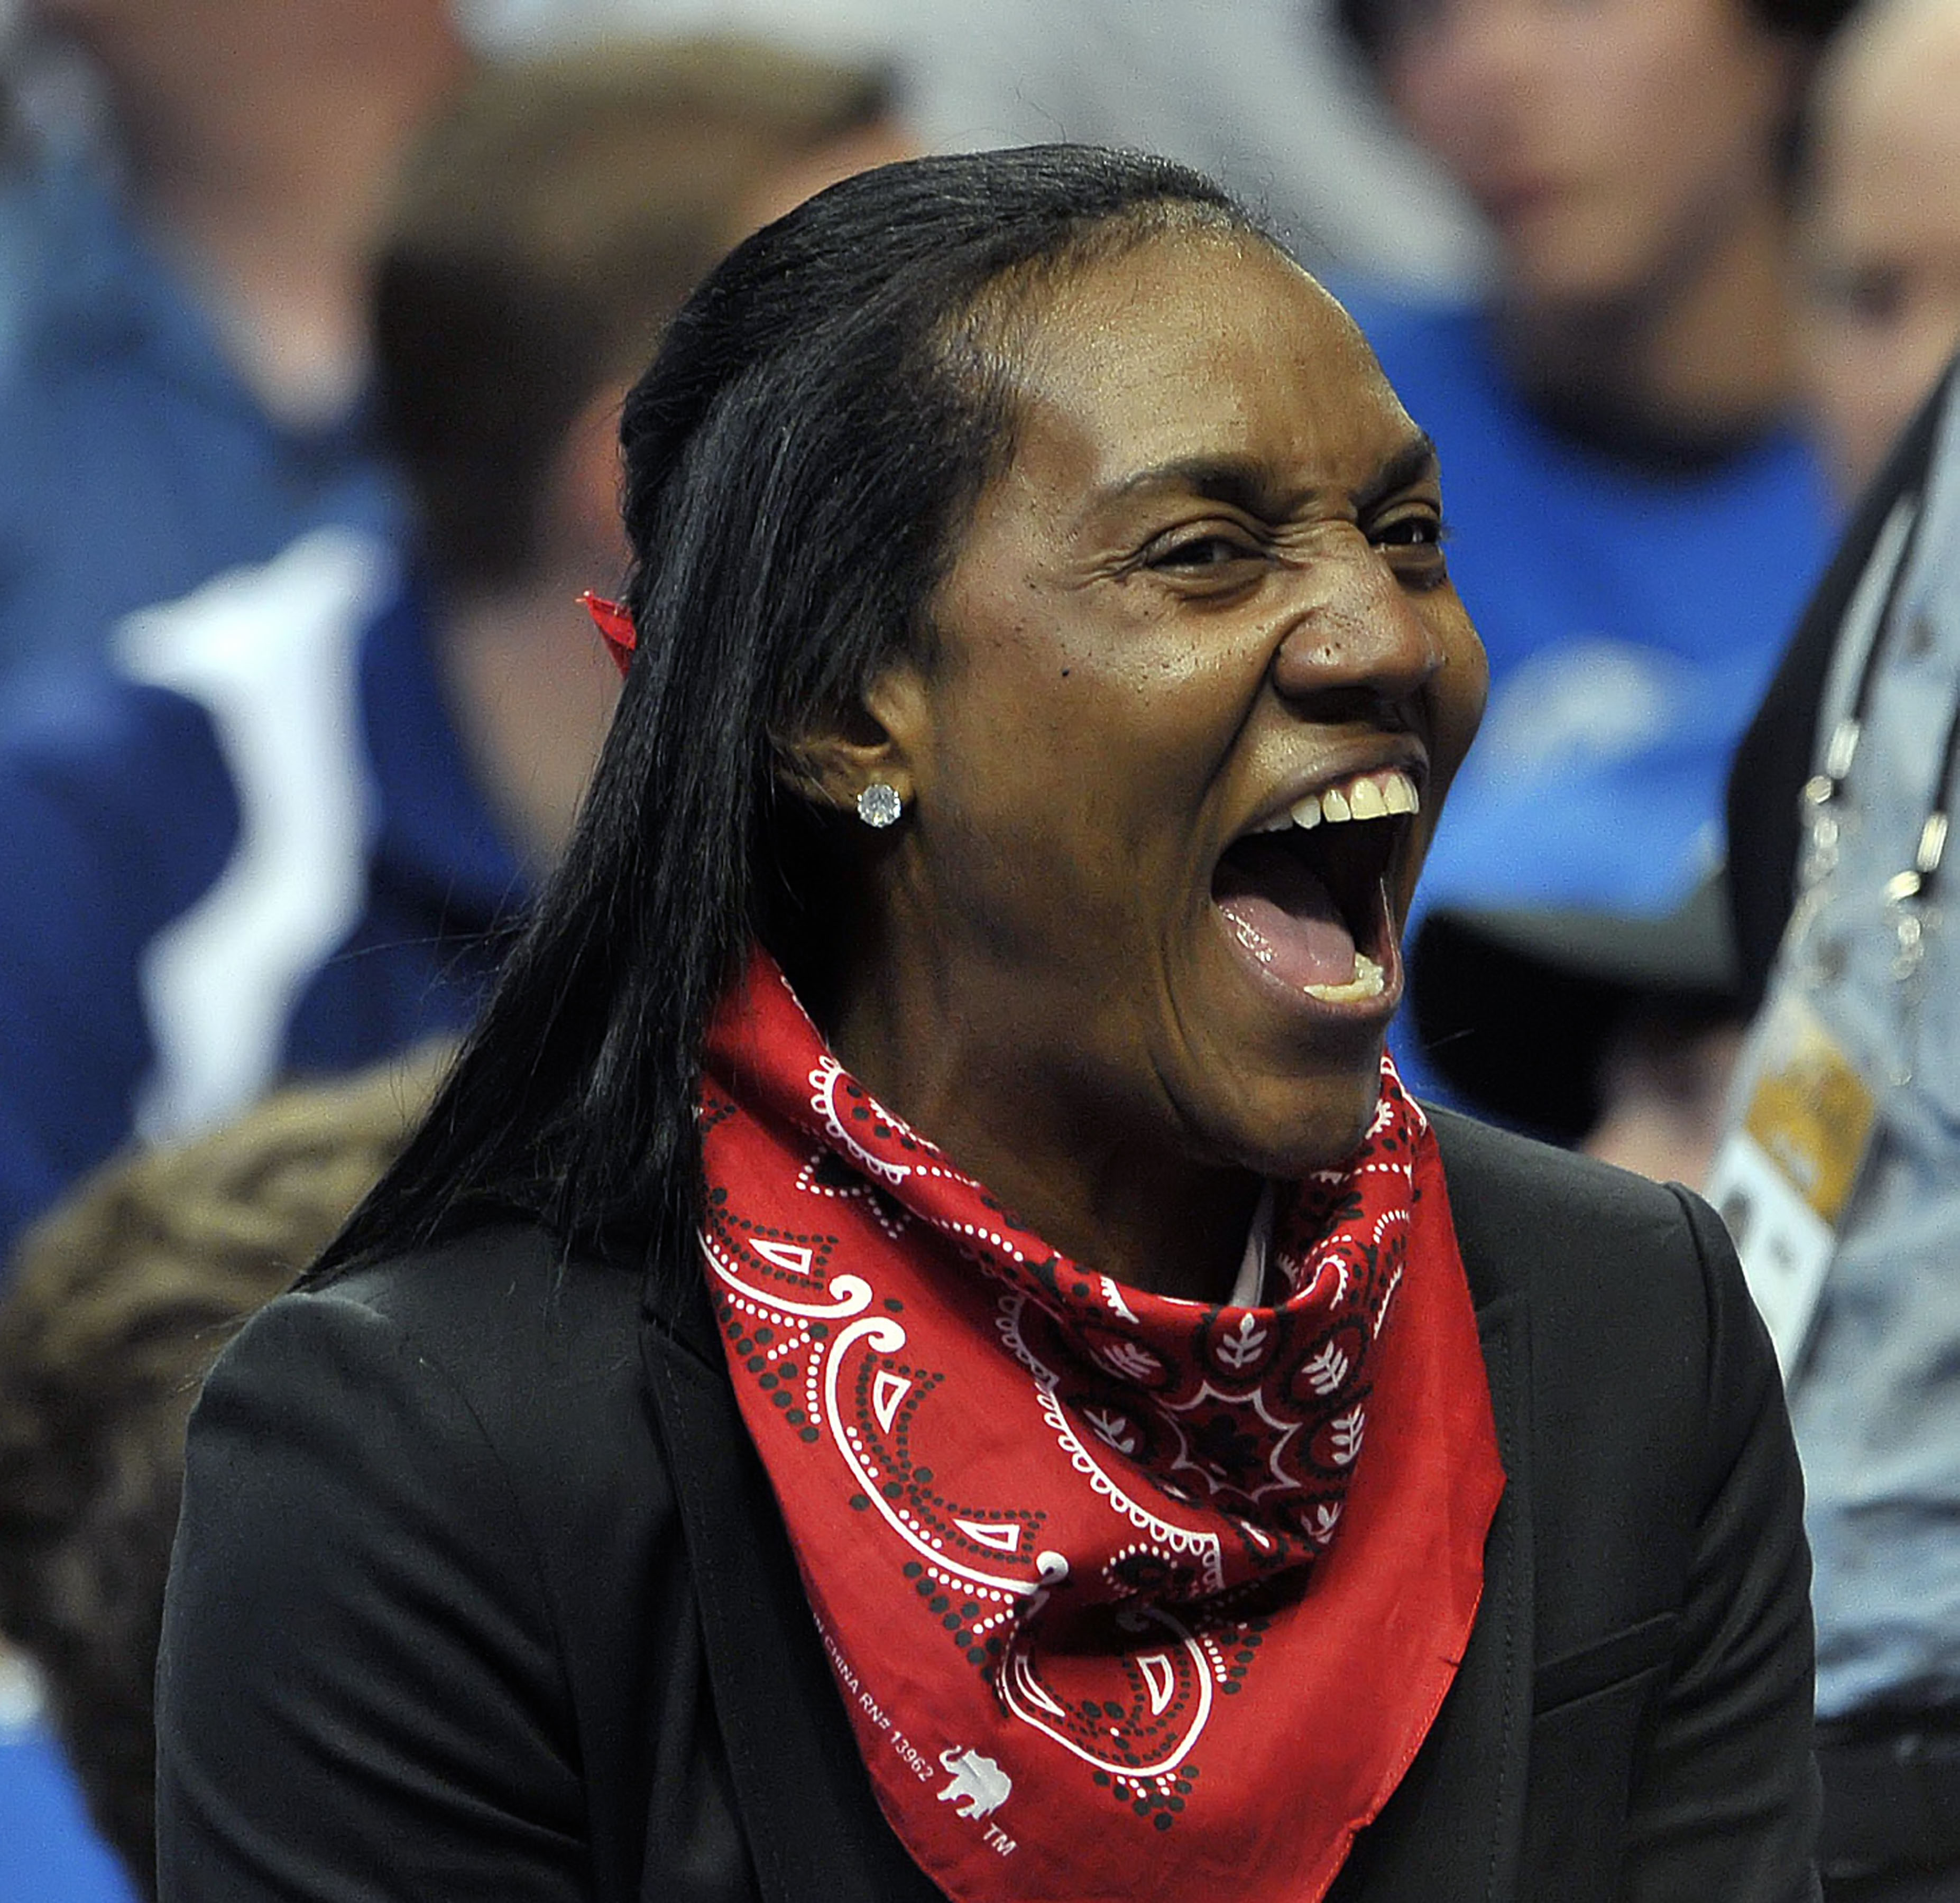 LeBron James' mother Gloria during NBA Finals between the Miami Heat and the Dallas Mavericks in Dallas, Texas, on June 7, 2011 | Source: Getty Images